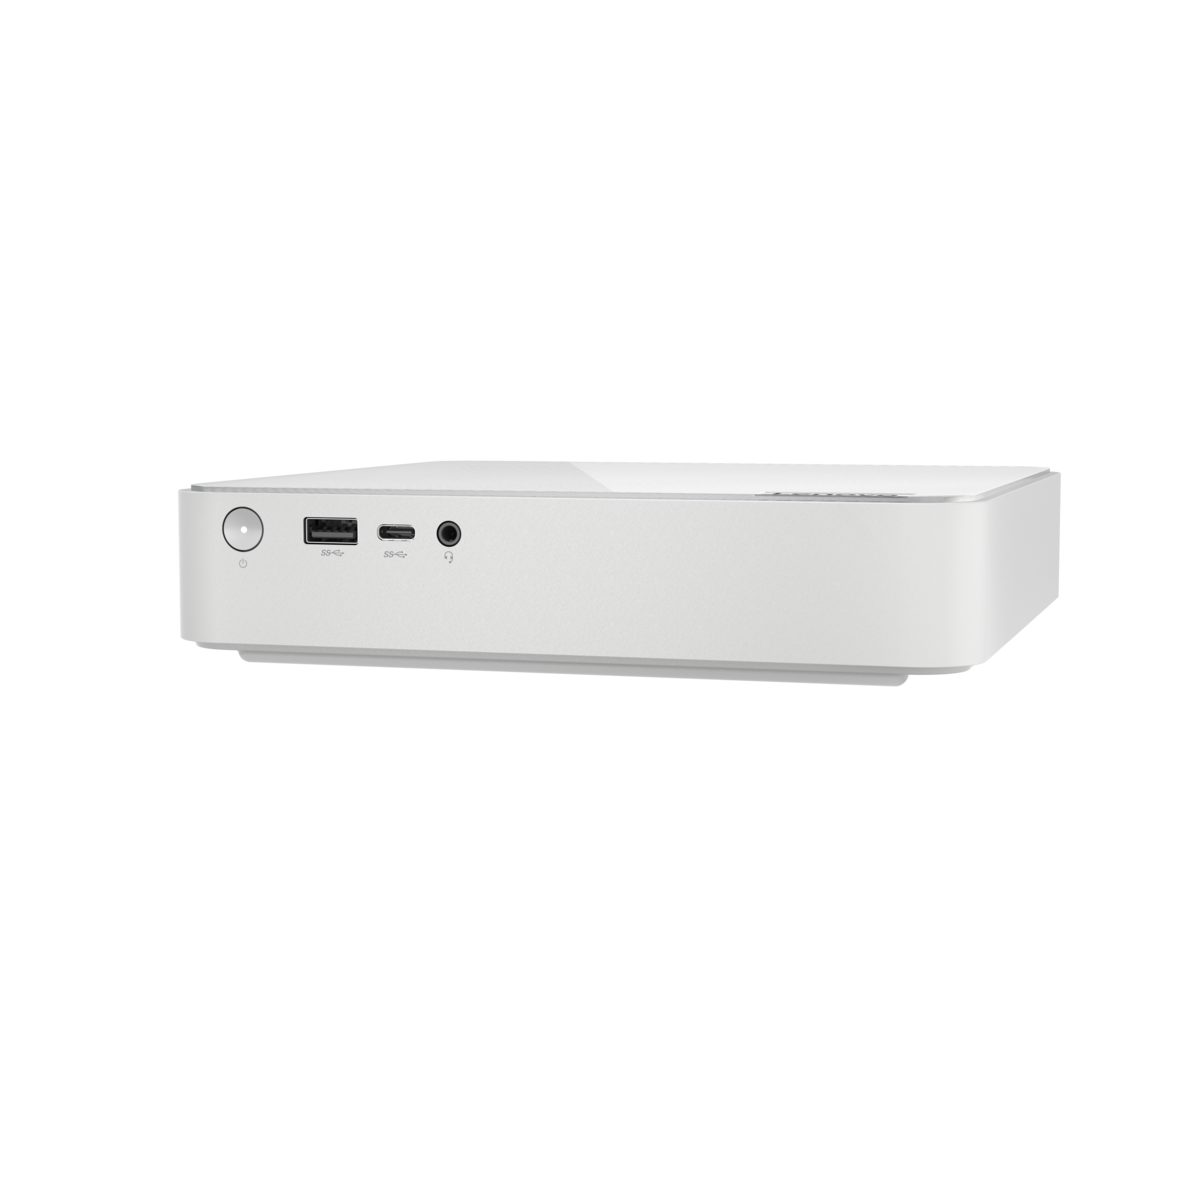 Introducing Lenovo's Ultra-Compact Mini PC: Only 1L in Size and